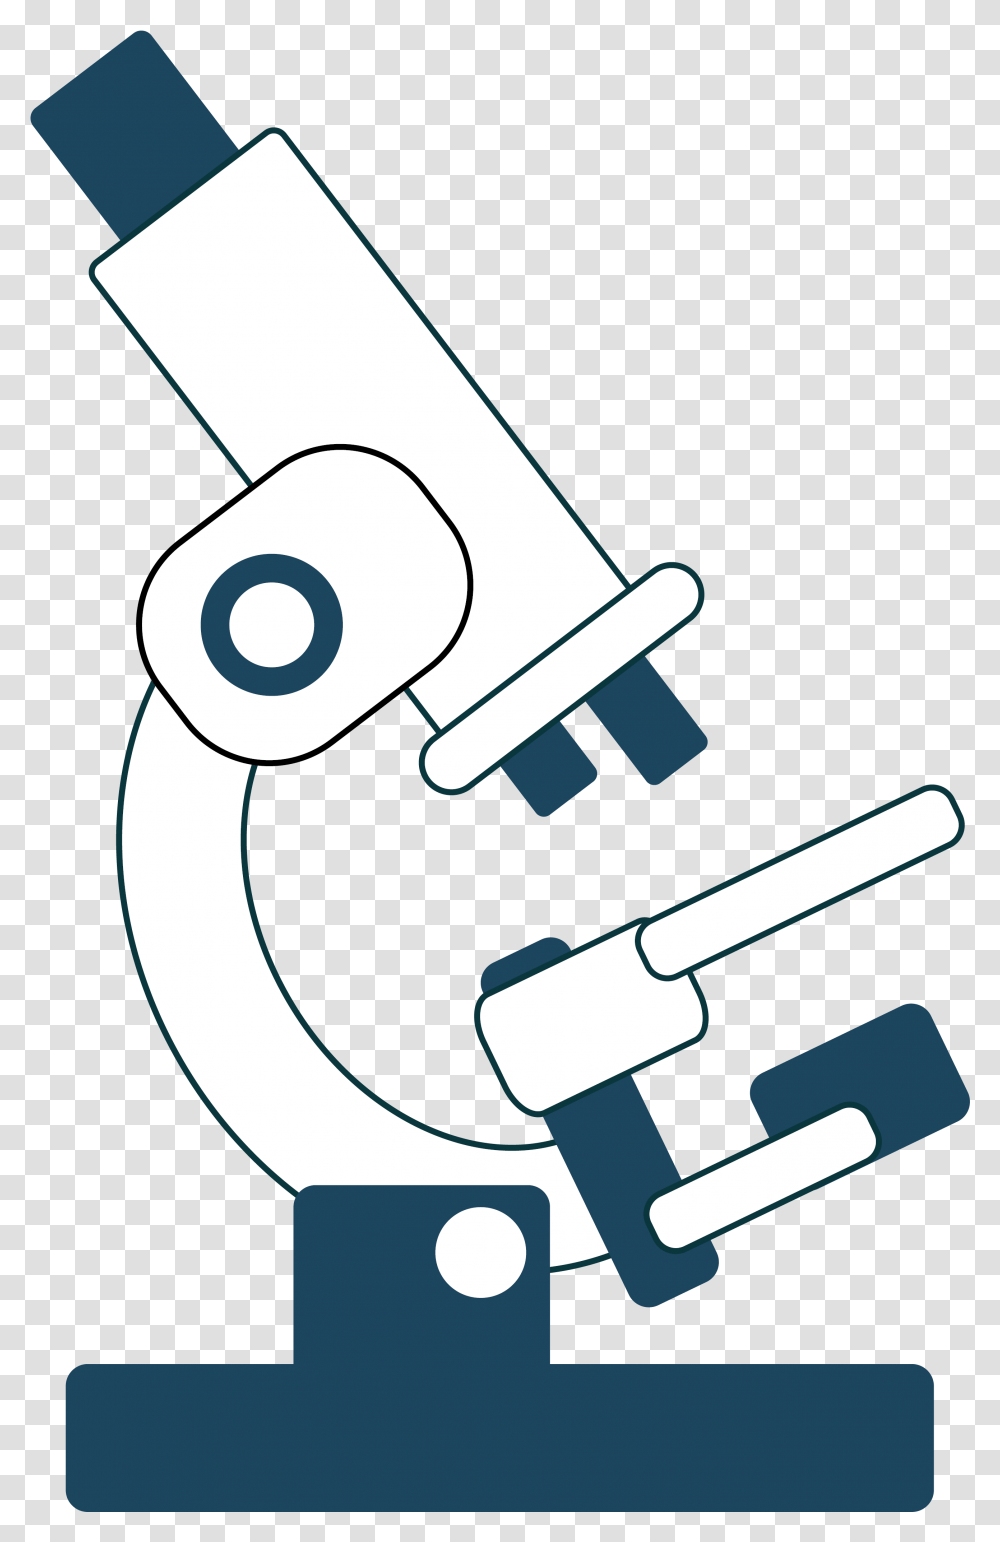 Diseases Such As Cancer Heart Disease And Diabetes Cartoon Microscope, Adapter, Hammer, Tool, Plug Transparent Png